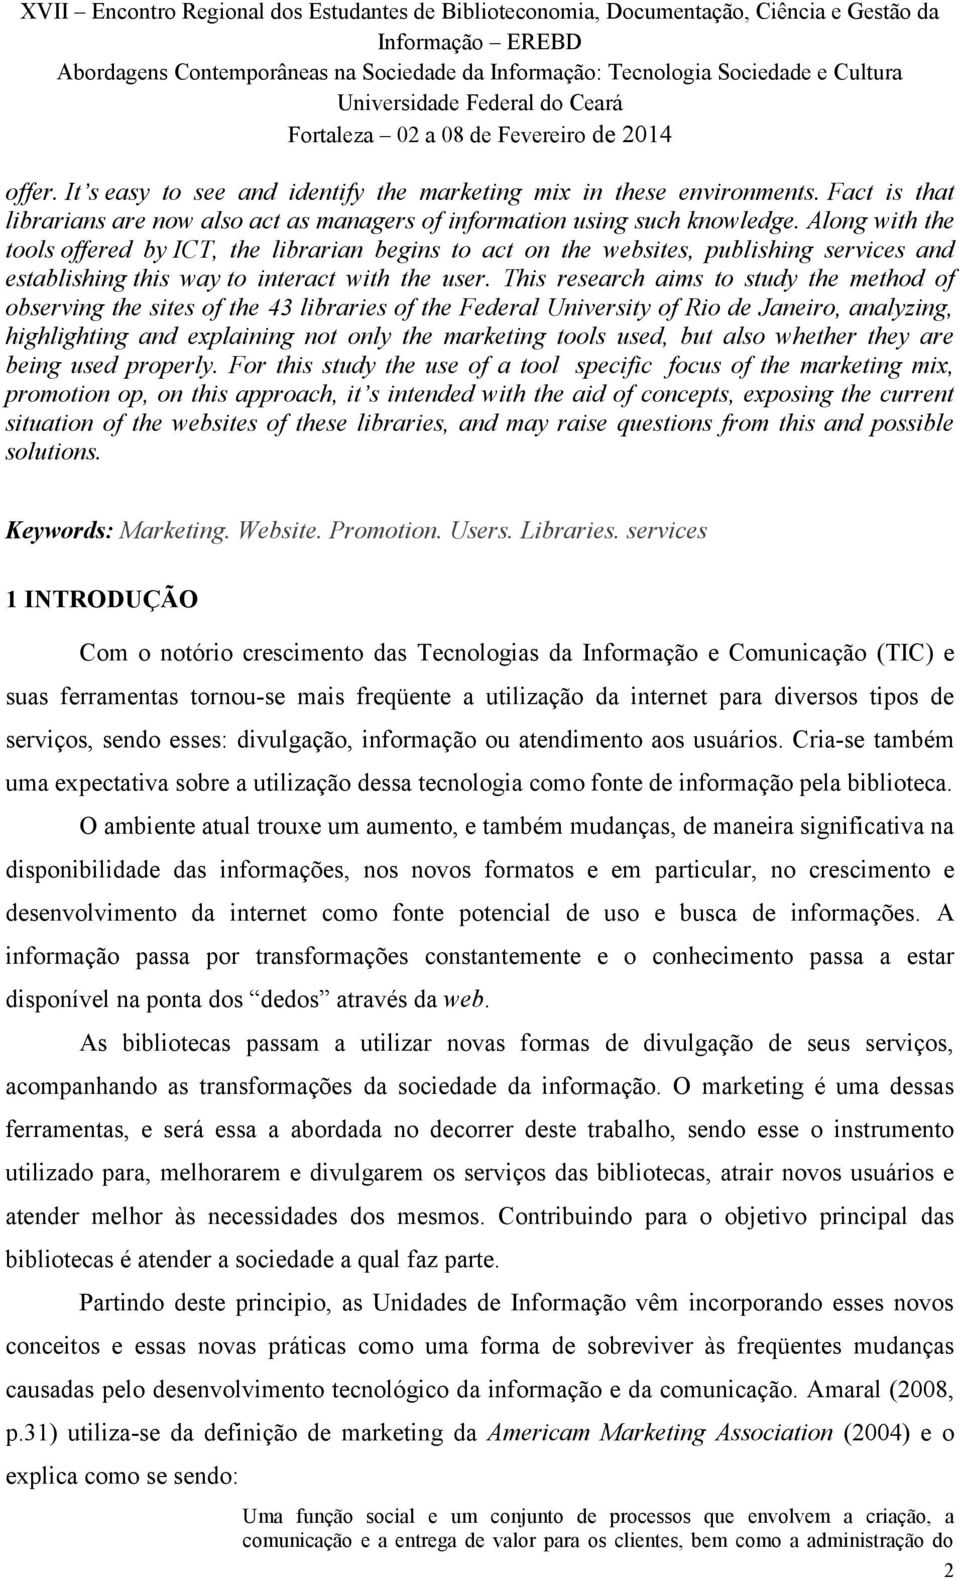 This research aims to study the method of observing the sites of the 43 libraries of the Federal University of Rio de Janeiro, analyzing, highlighting and explaining not only the marketing tools